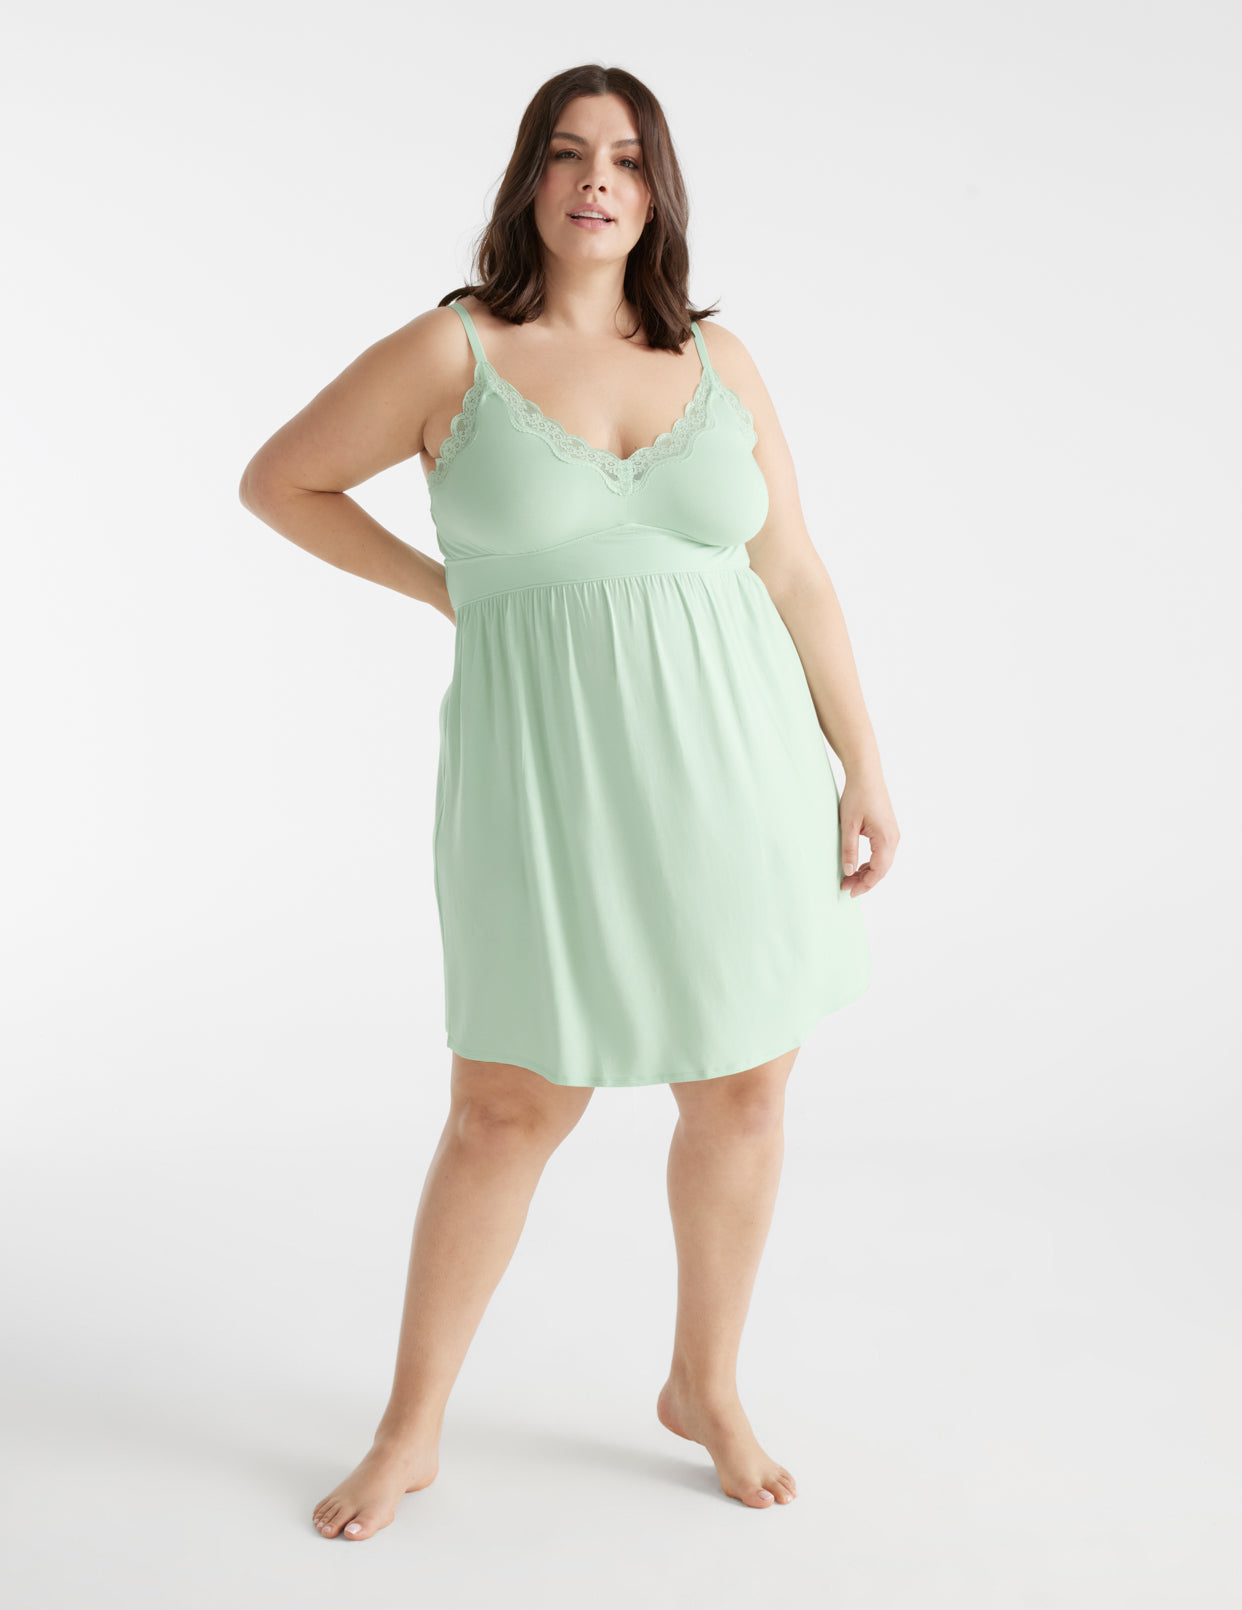 Melissa is a 40D and has 48" hips and wears a Knix size XXL 